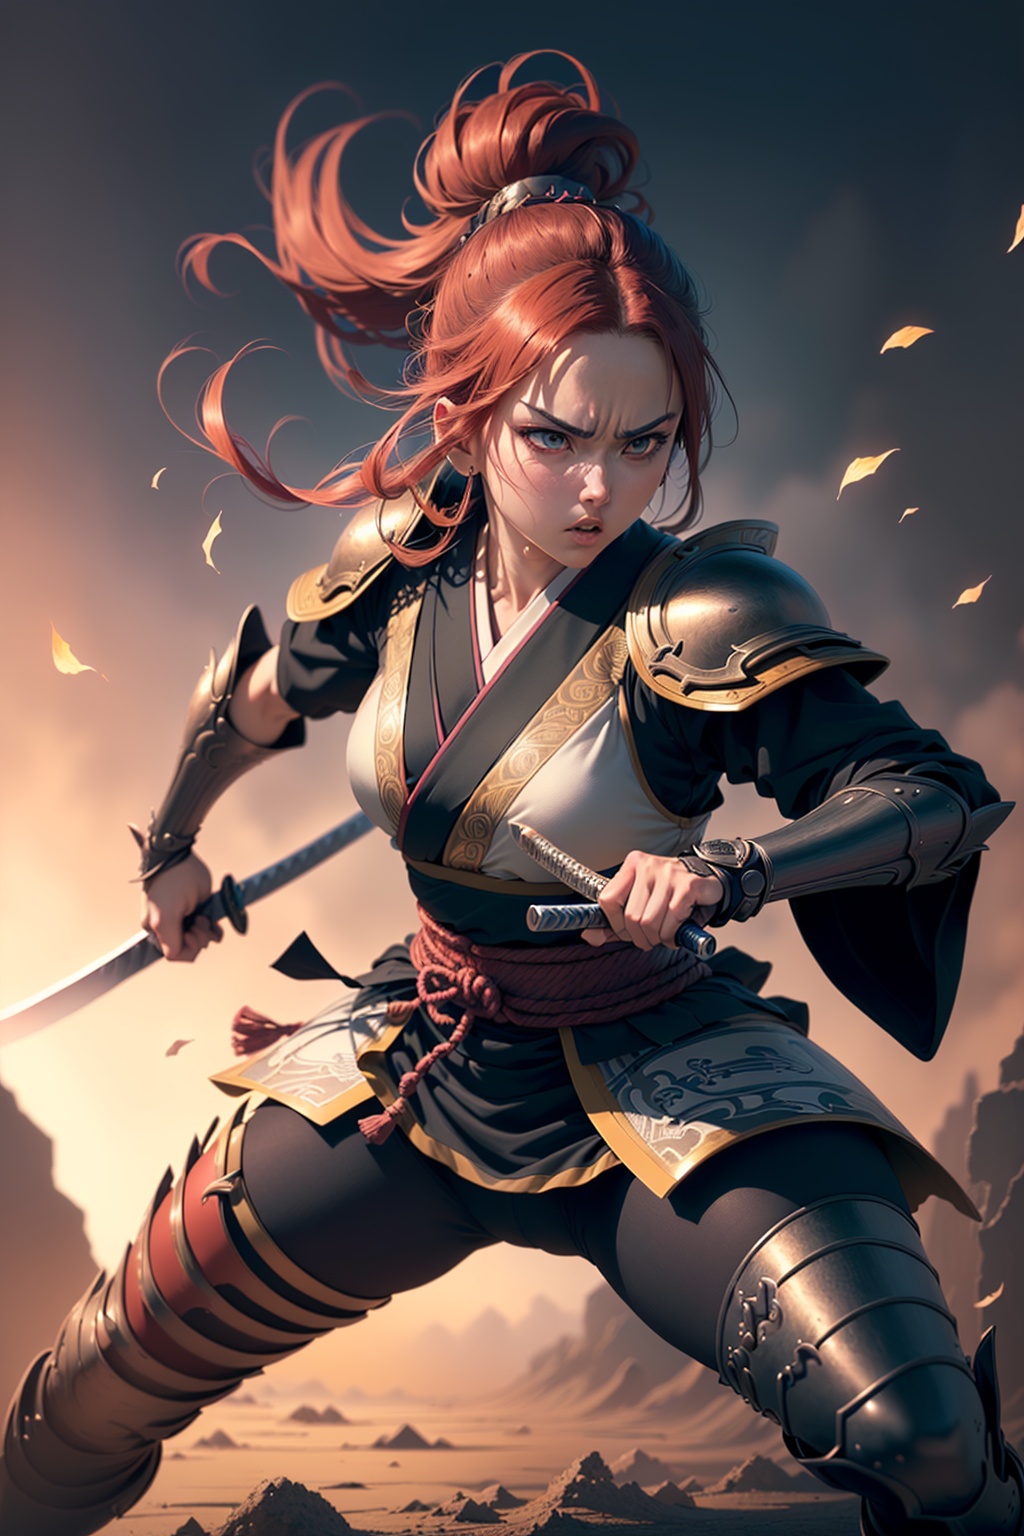 ((best quality)), ((masterpiece)), (detailed), fierce anime woman, wielding katana, battle-ready stance, intricate armor, flowing hair, (Japanese animation style:1.3), (Masashi Kishimoto:1.1), (Tite Kubo:1.1), intense gaze, dynamic background, vibrant colors, (action-packed composition:1.3), (8k resolution:1.2)